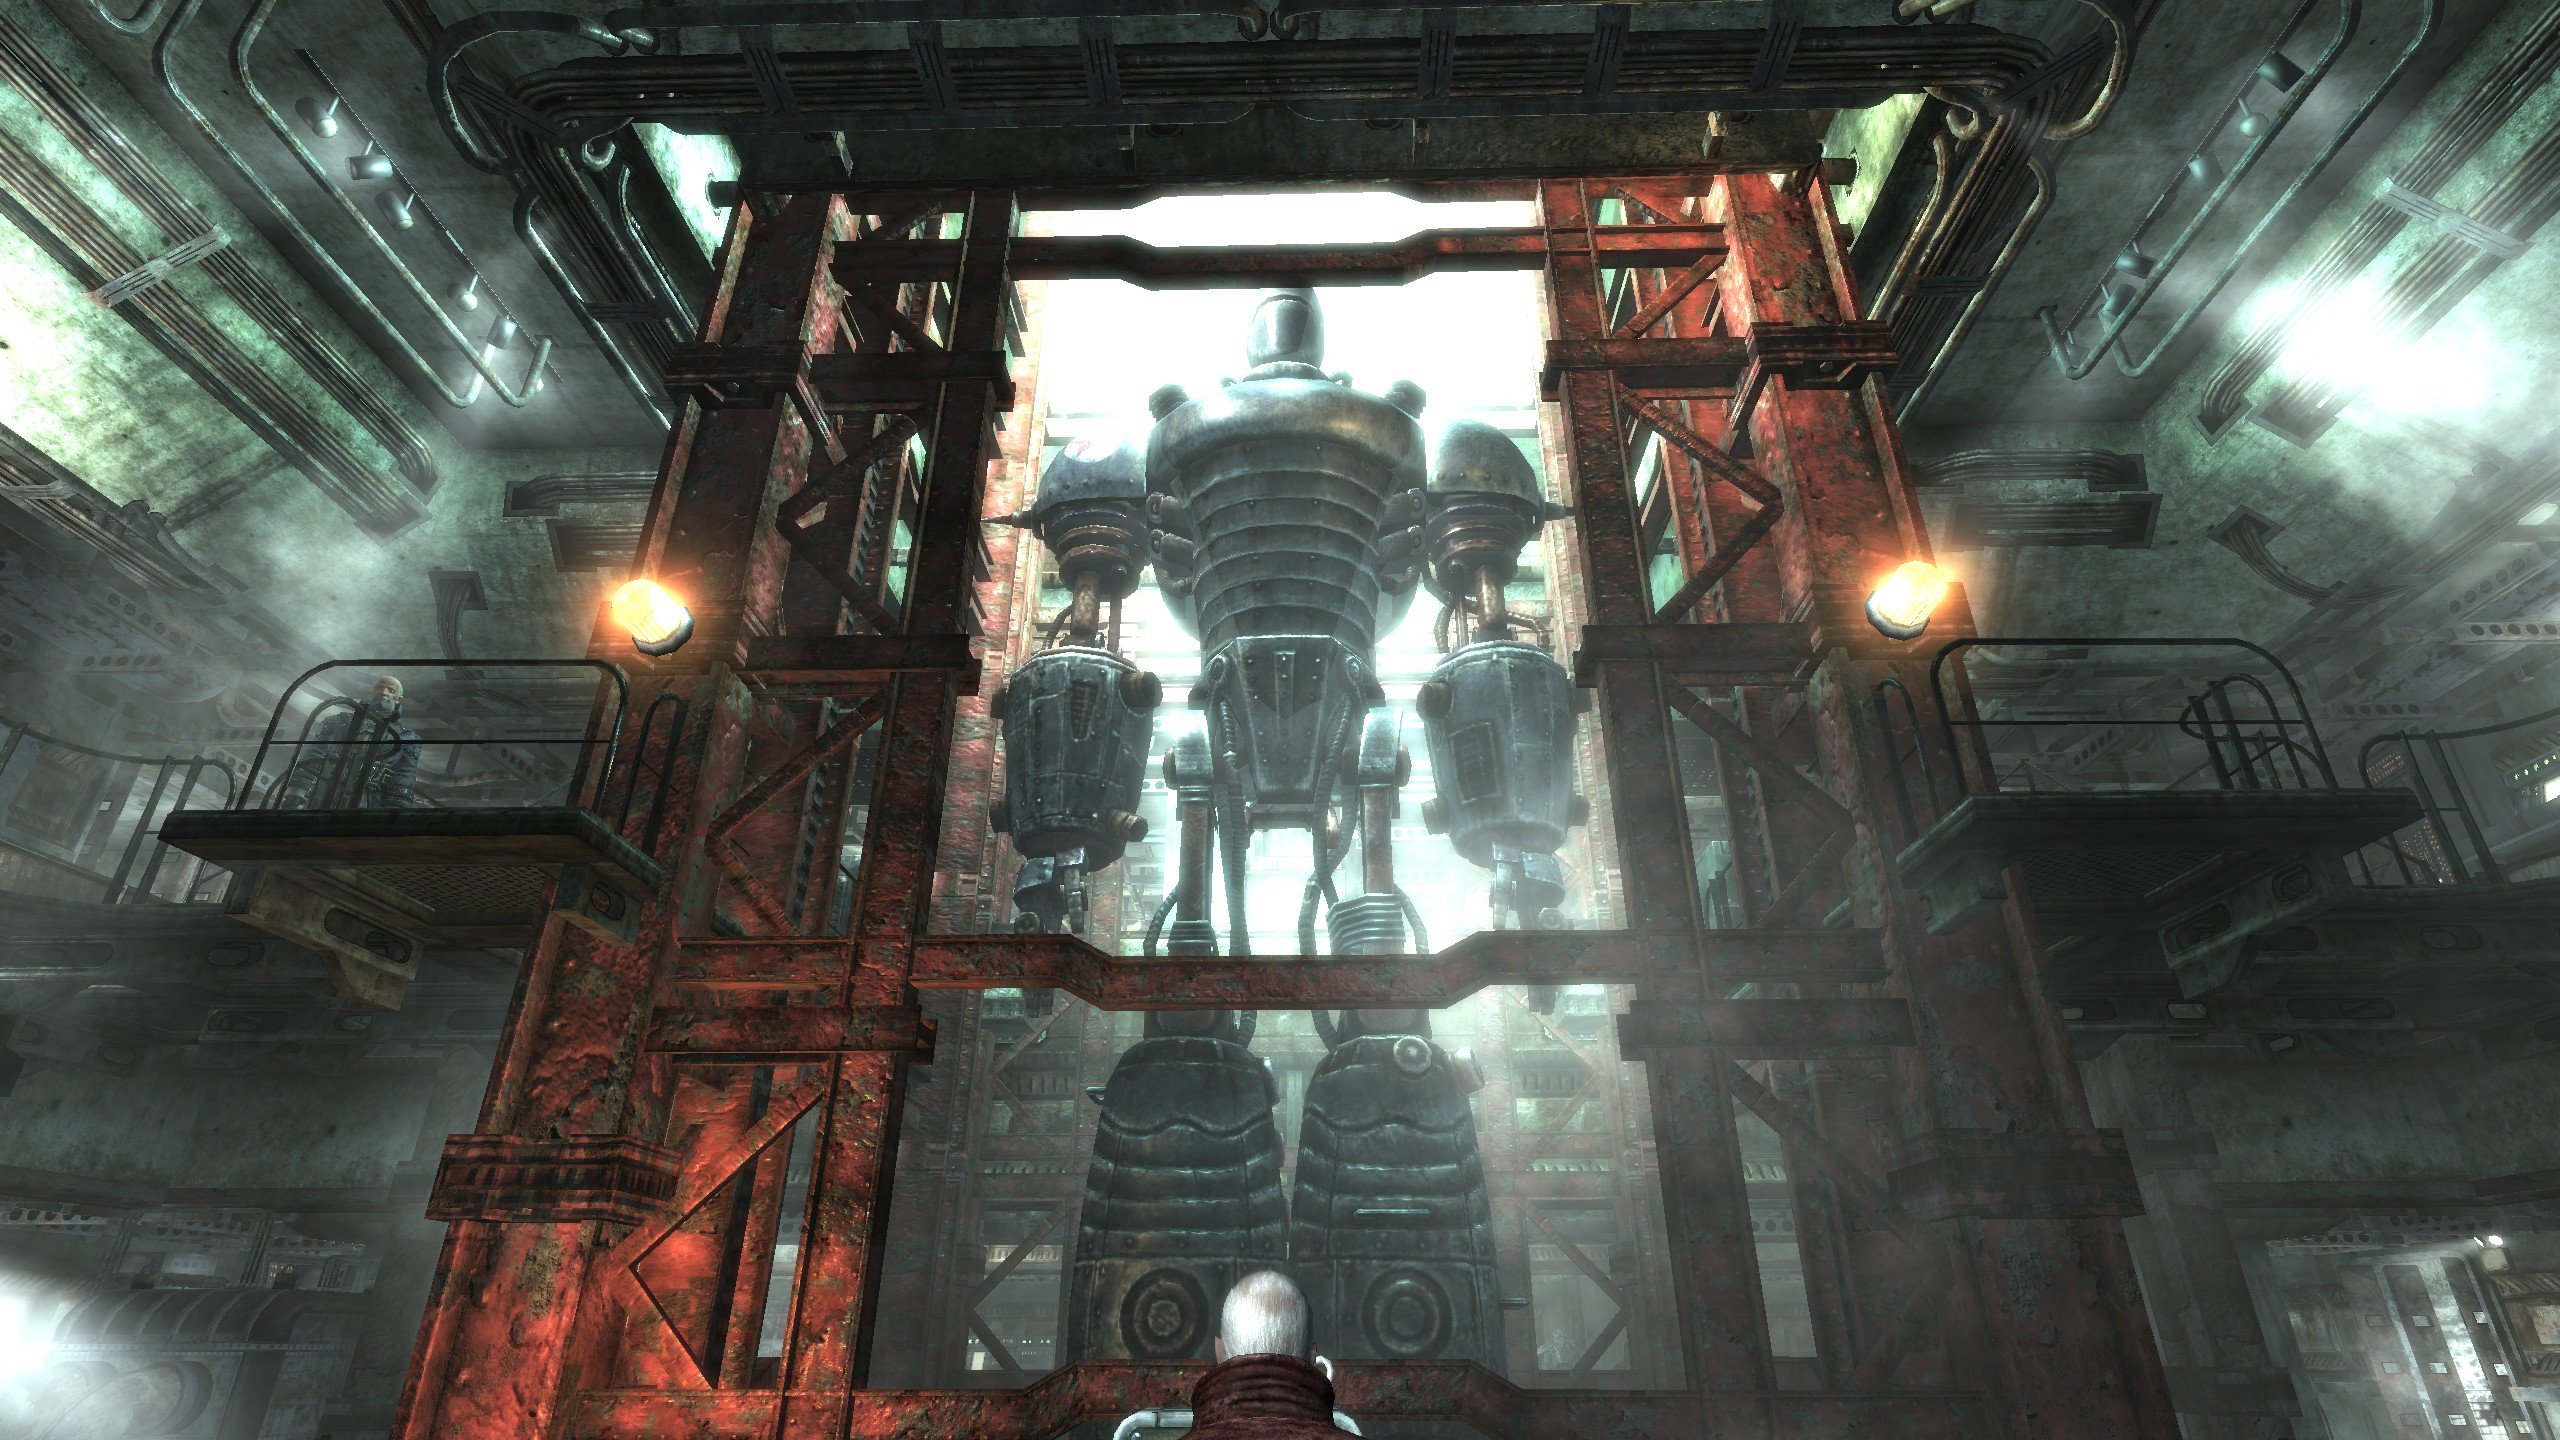 Fallout 3 wallpaper 1440p   nothing special just thought Id share 2560x1440